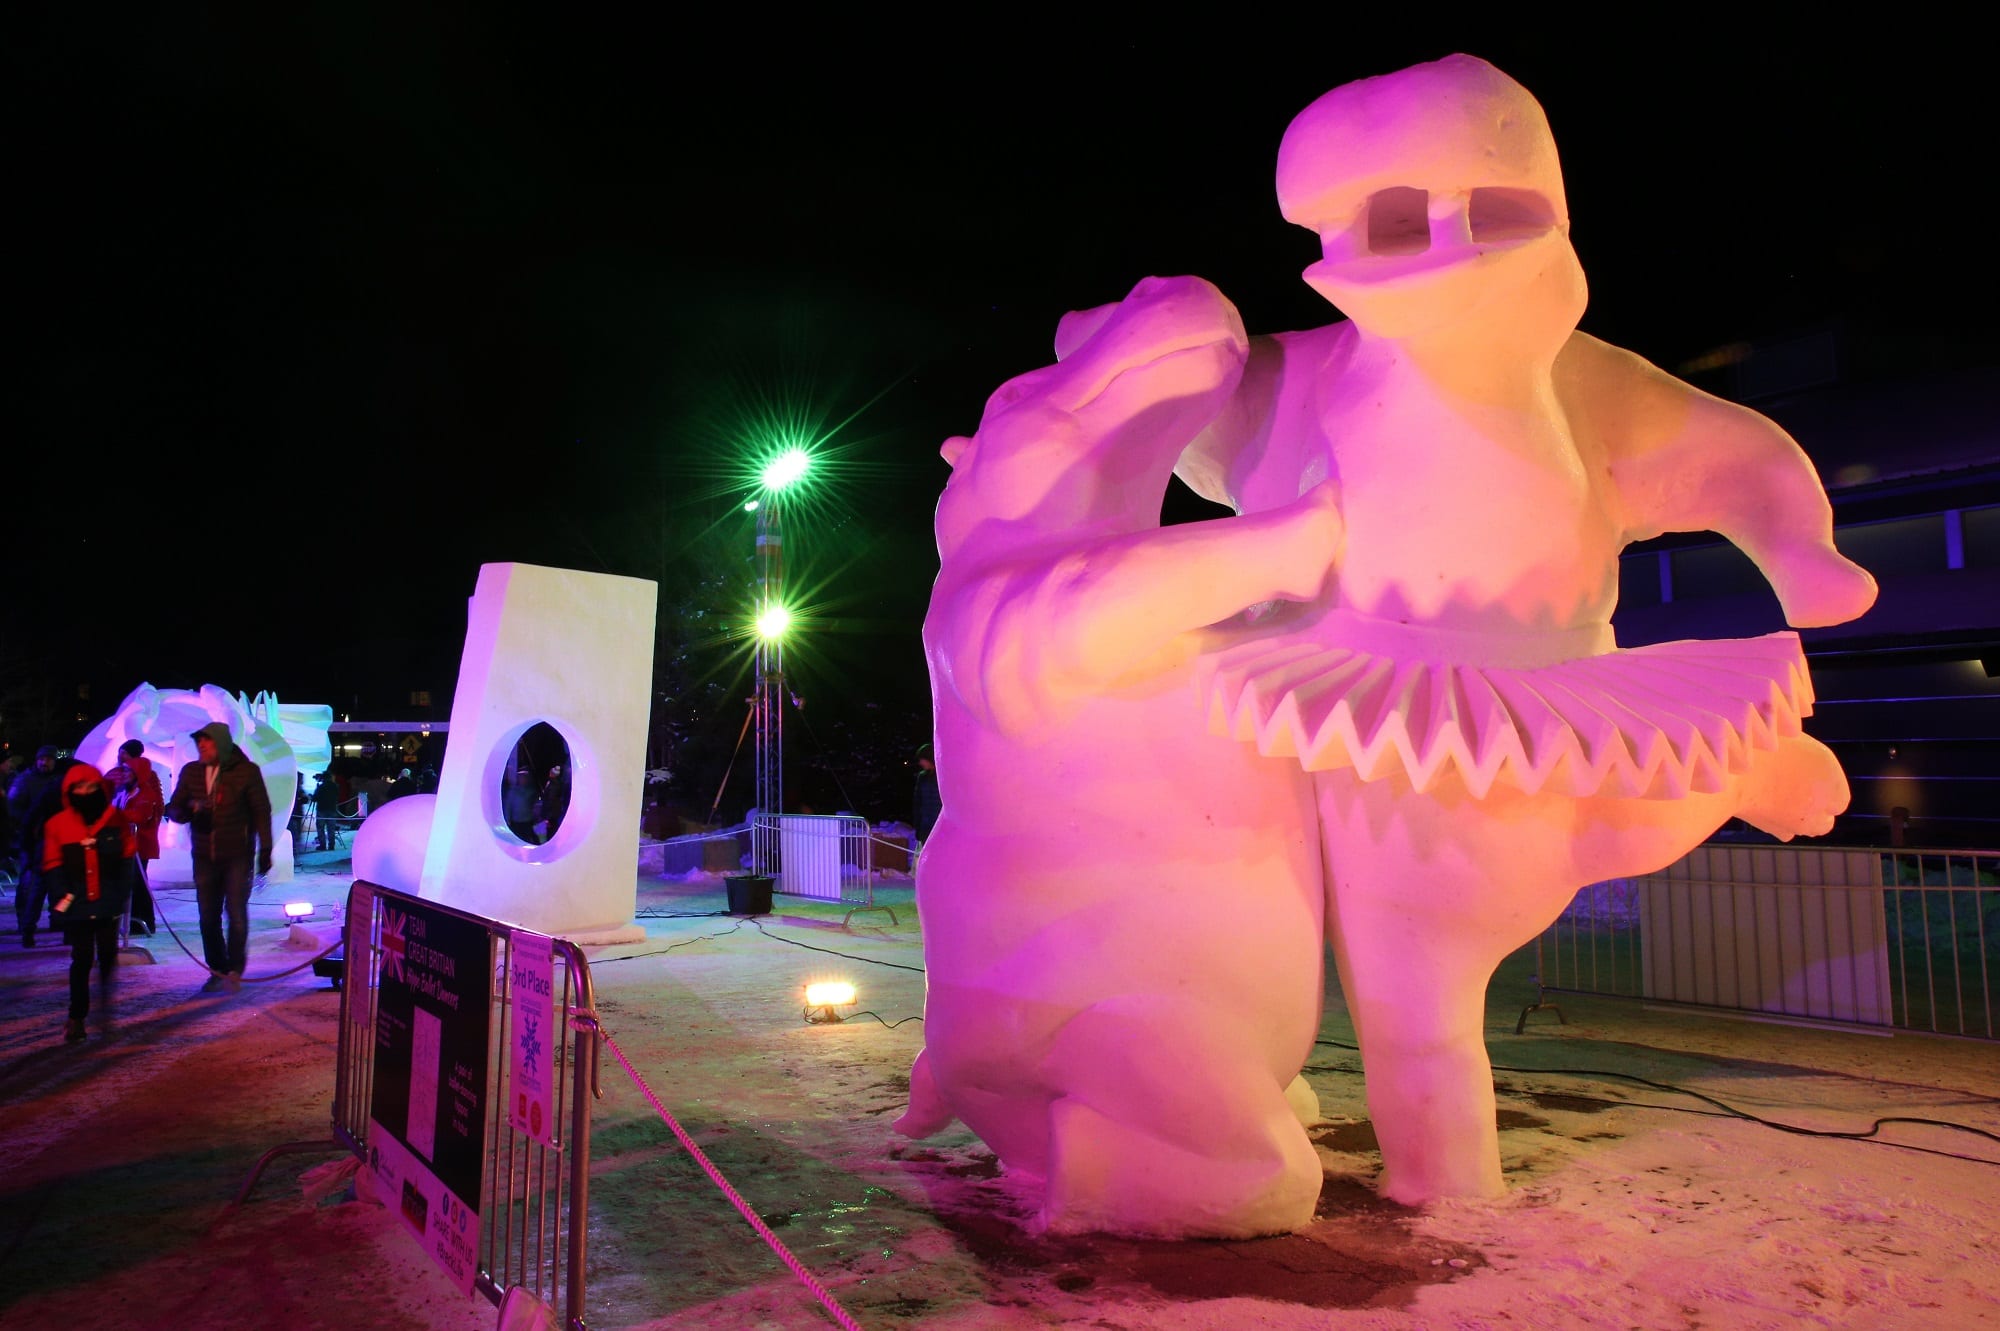 Snow Sculptures lit up by night for viewing.